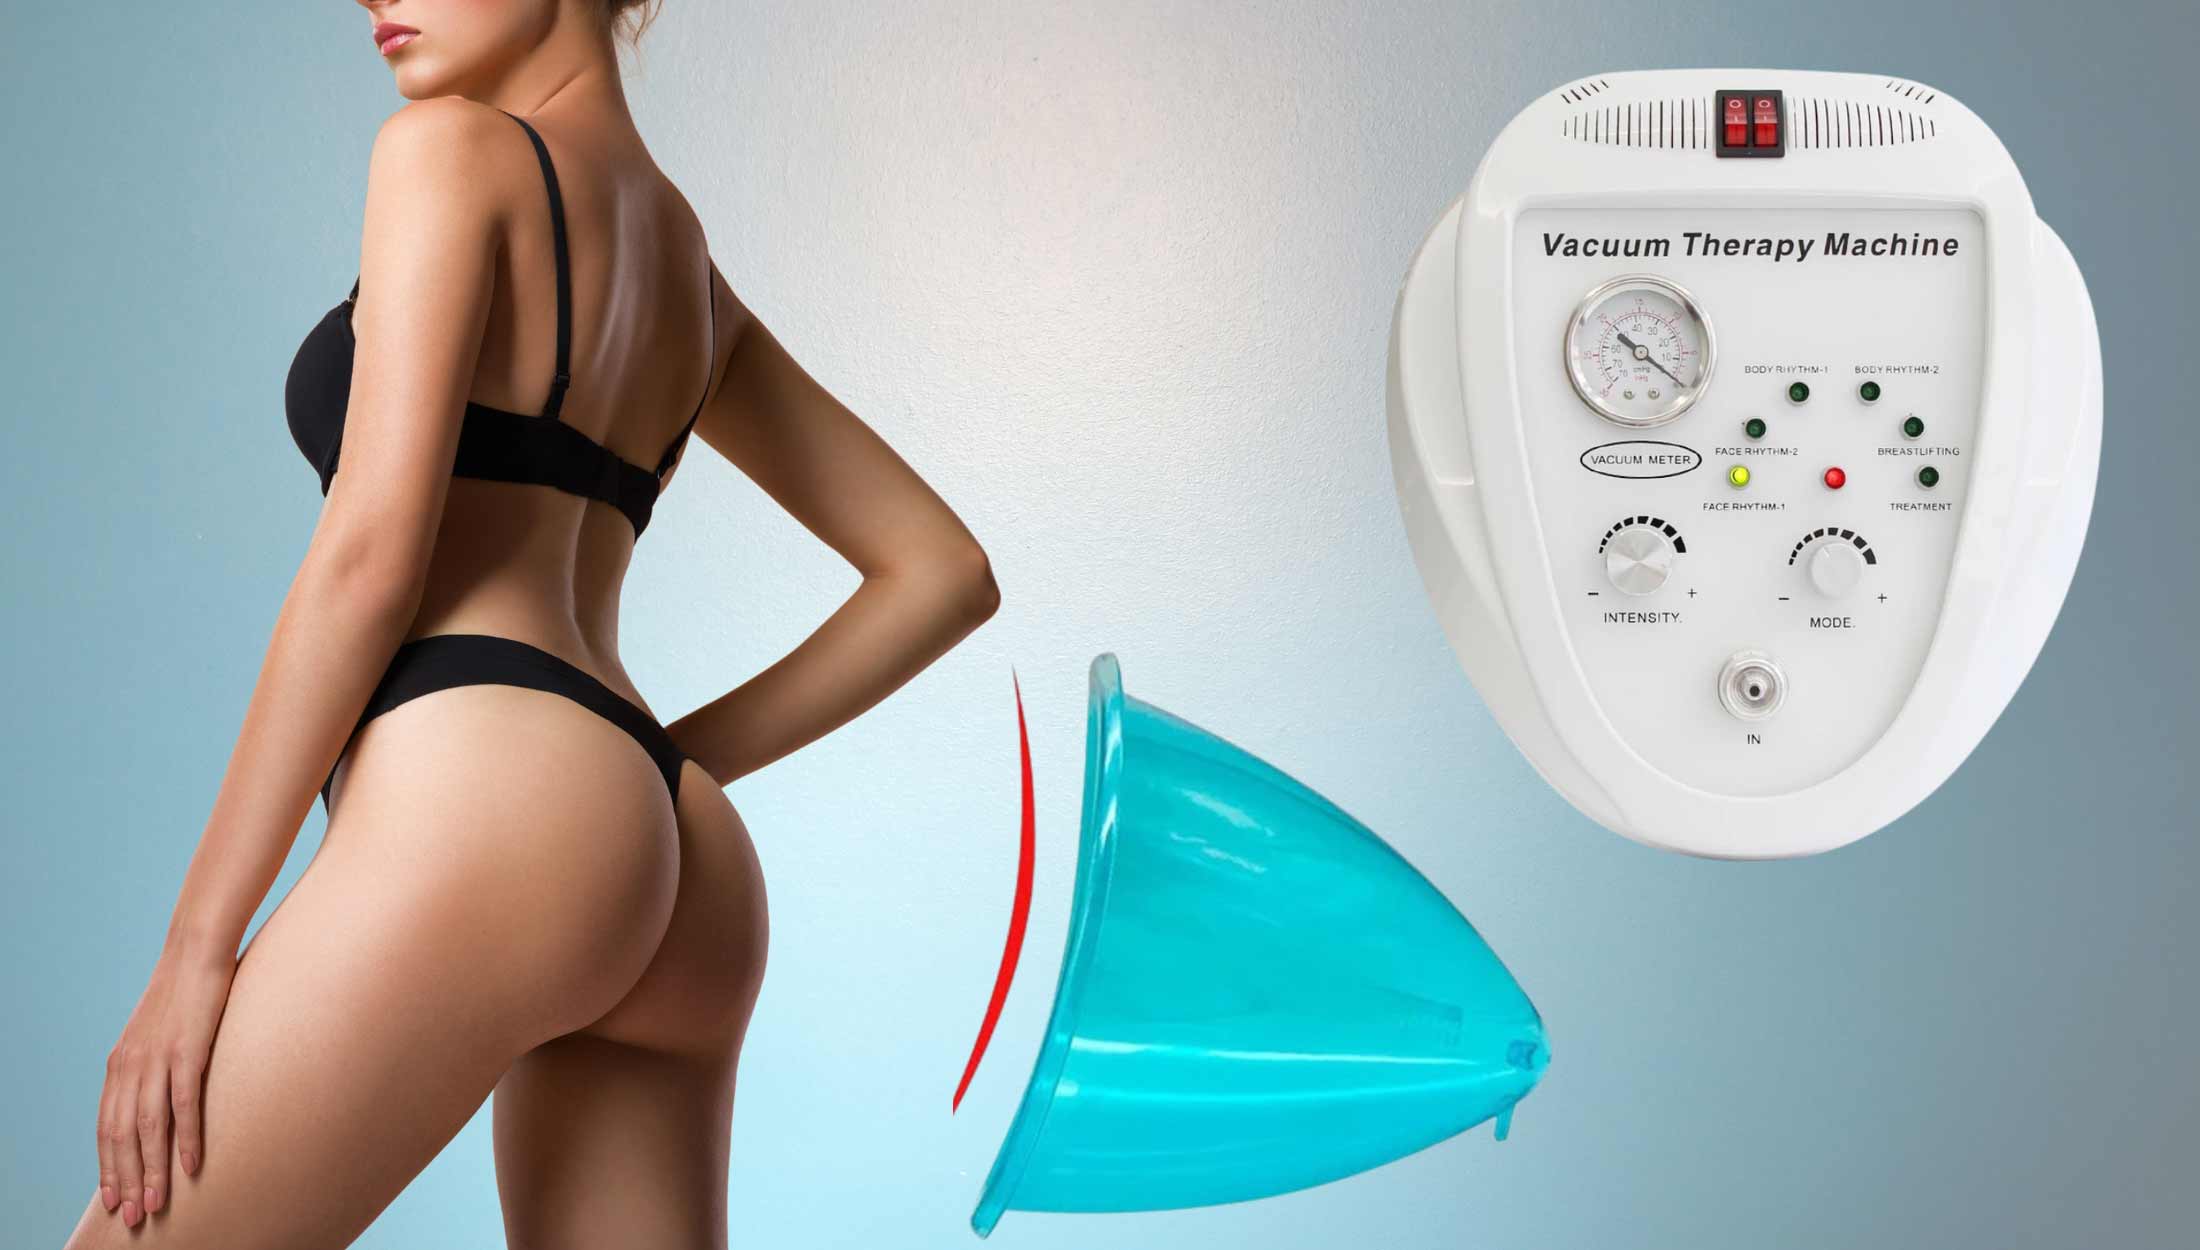 Vacuum Therapy Benefits for Cellulite Reduction & Lymphatic Drainage